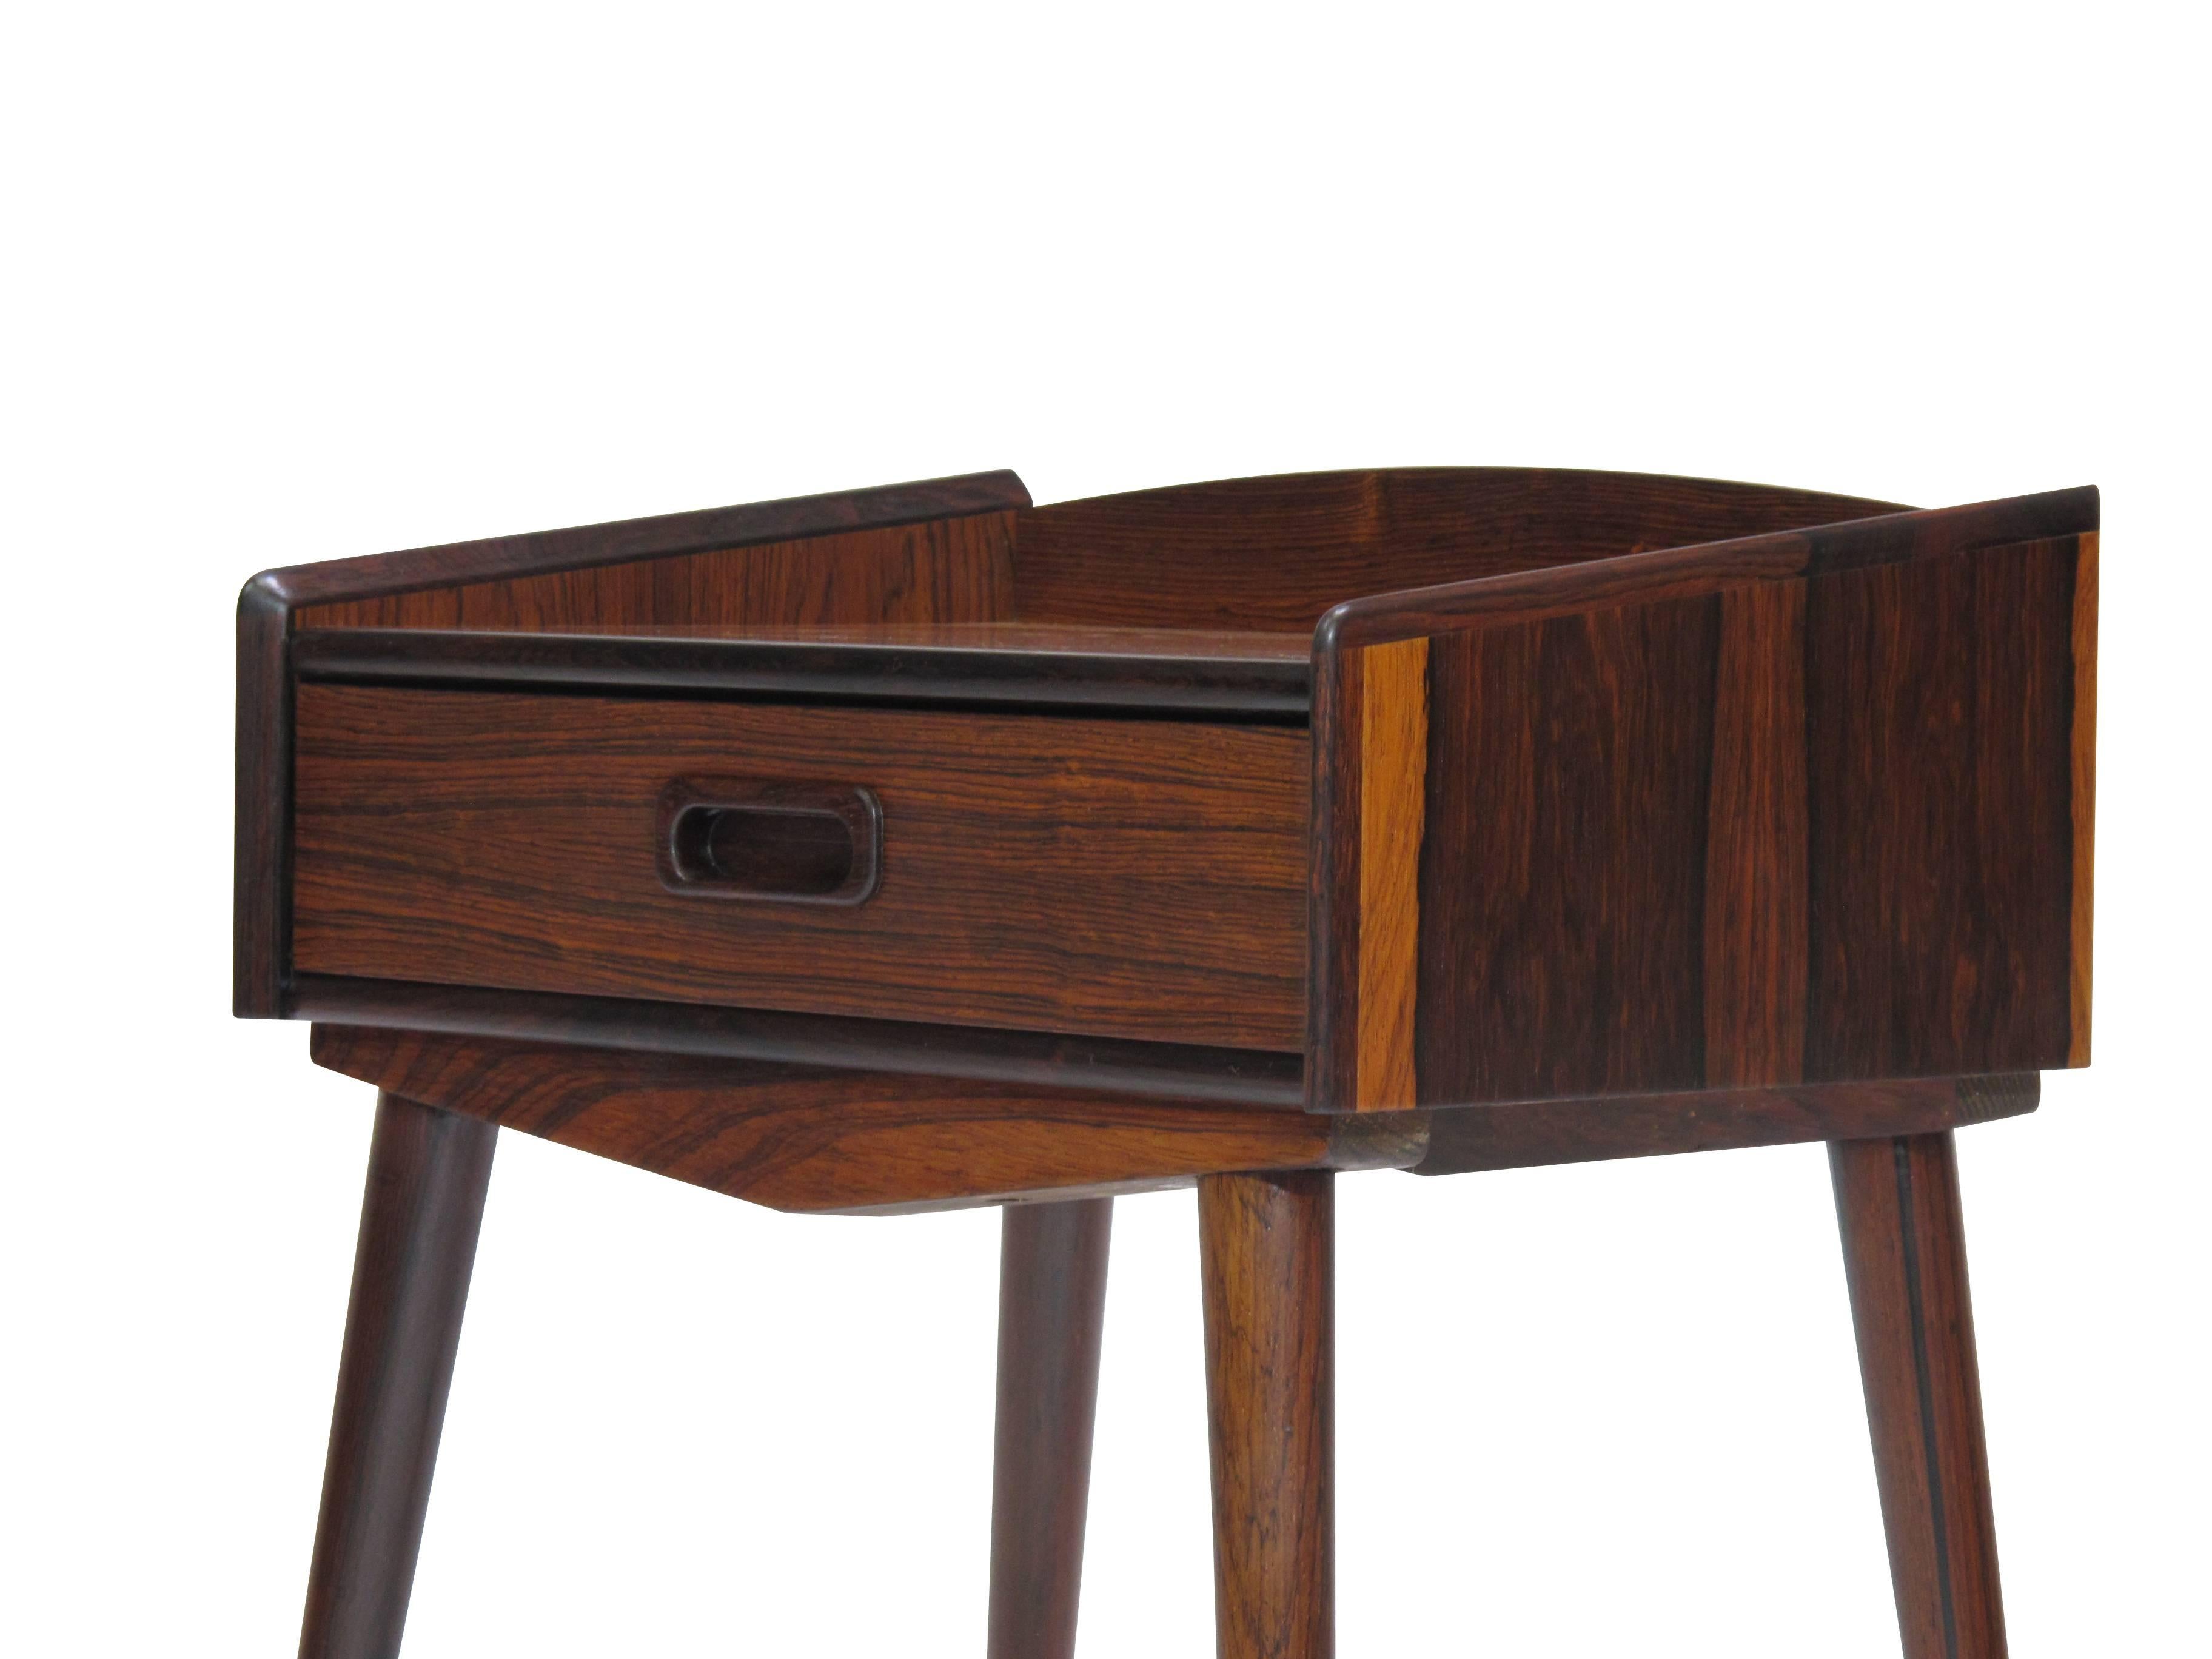 20th Century Danish Rosewood Nightstand Side Tables with Drawers